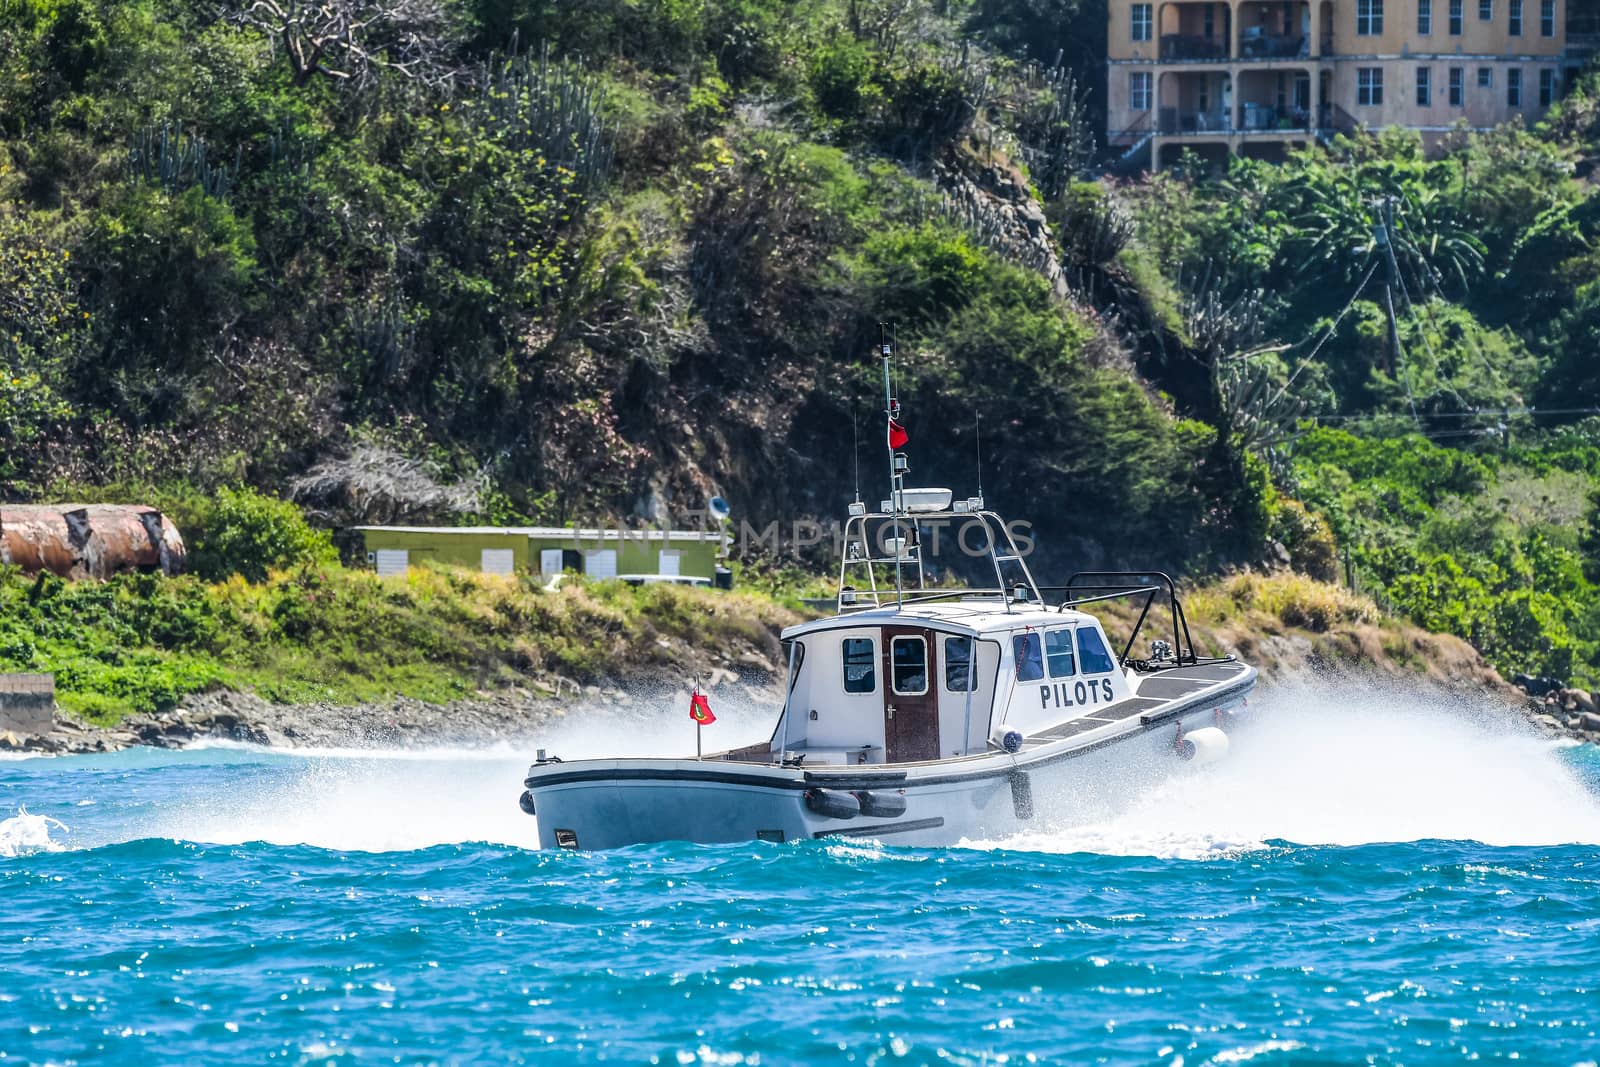 Pilot boat heading out from harbor at high speed with spray in British Virgin Islands